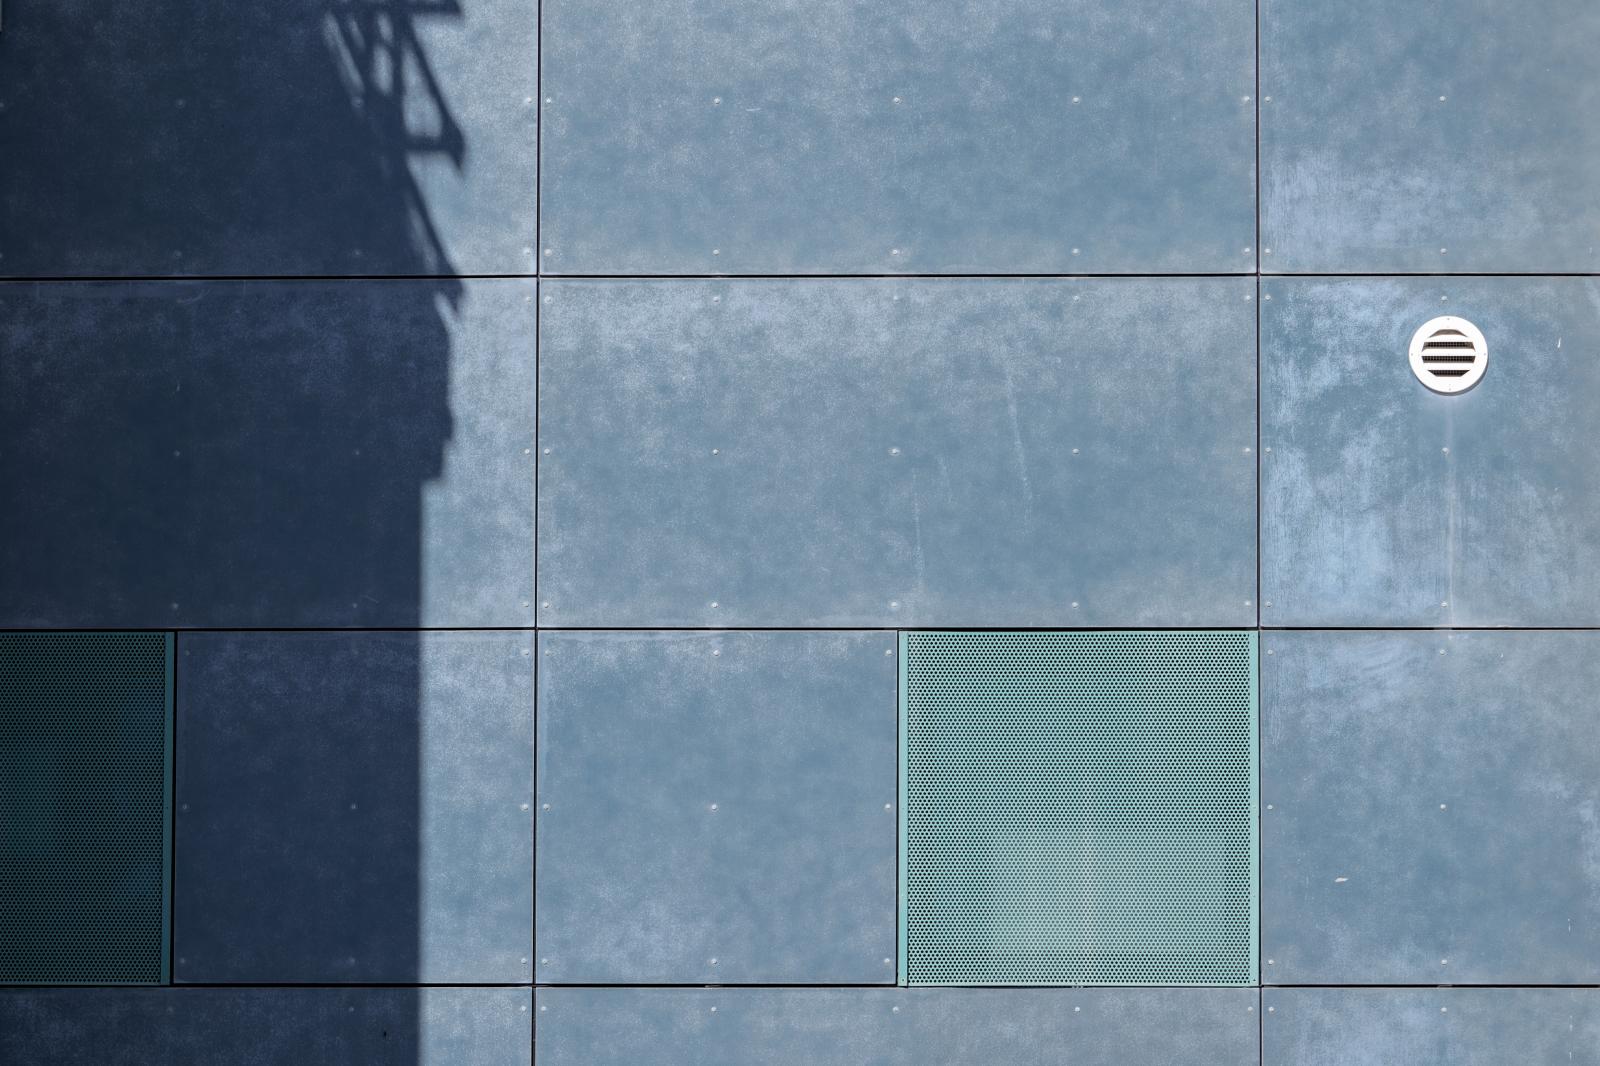 Geometry in Shade: Interaction between Light and Structure | Buy this image